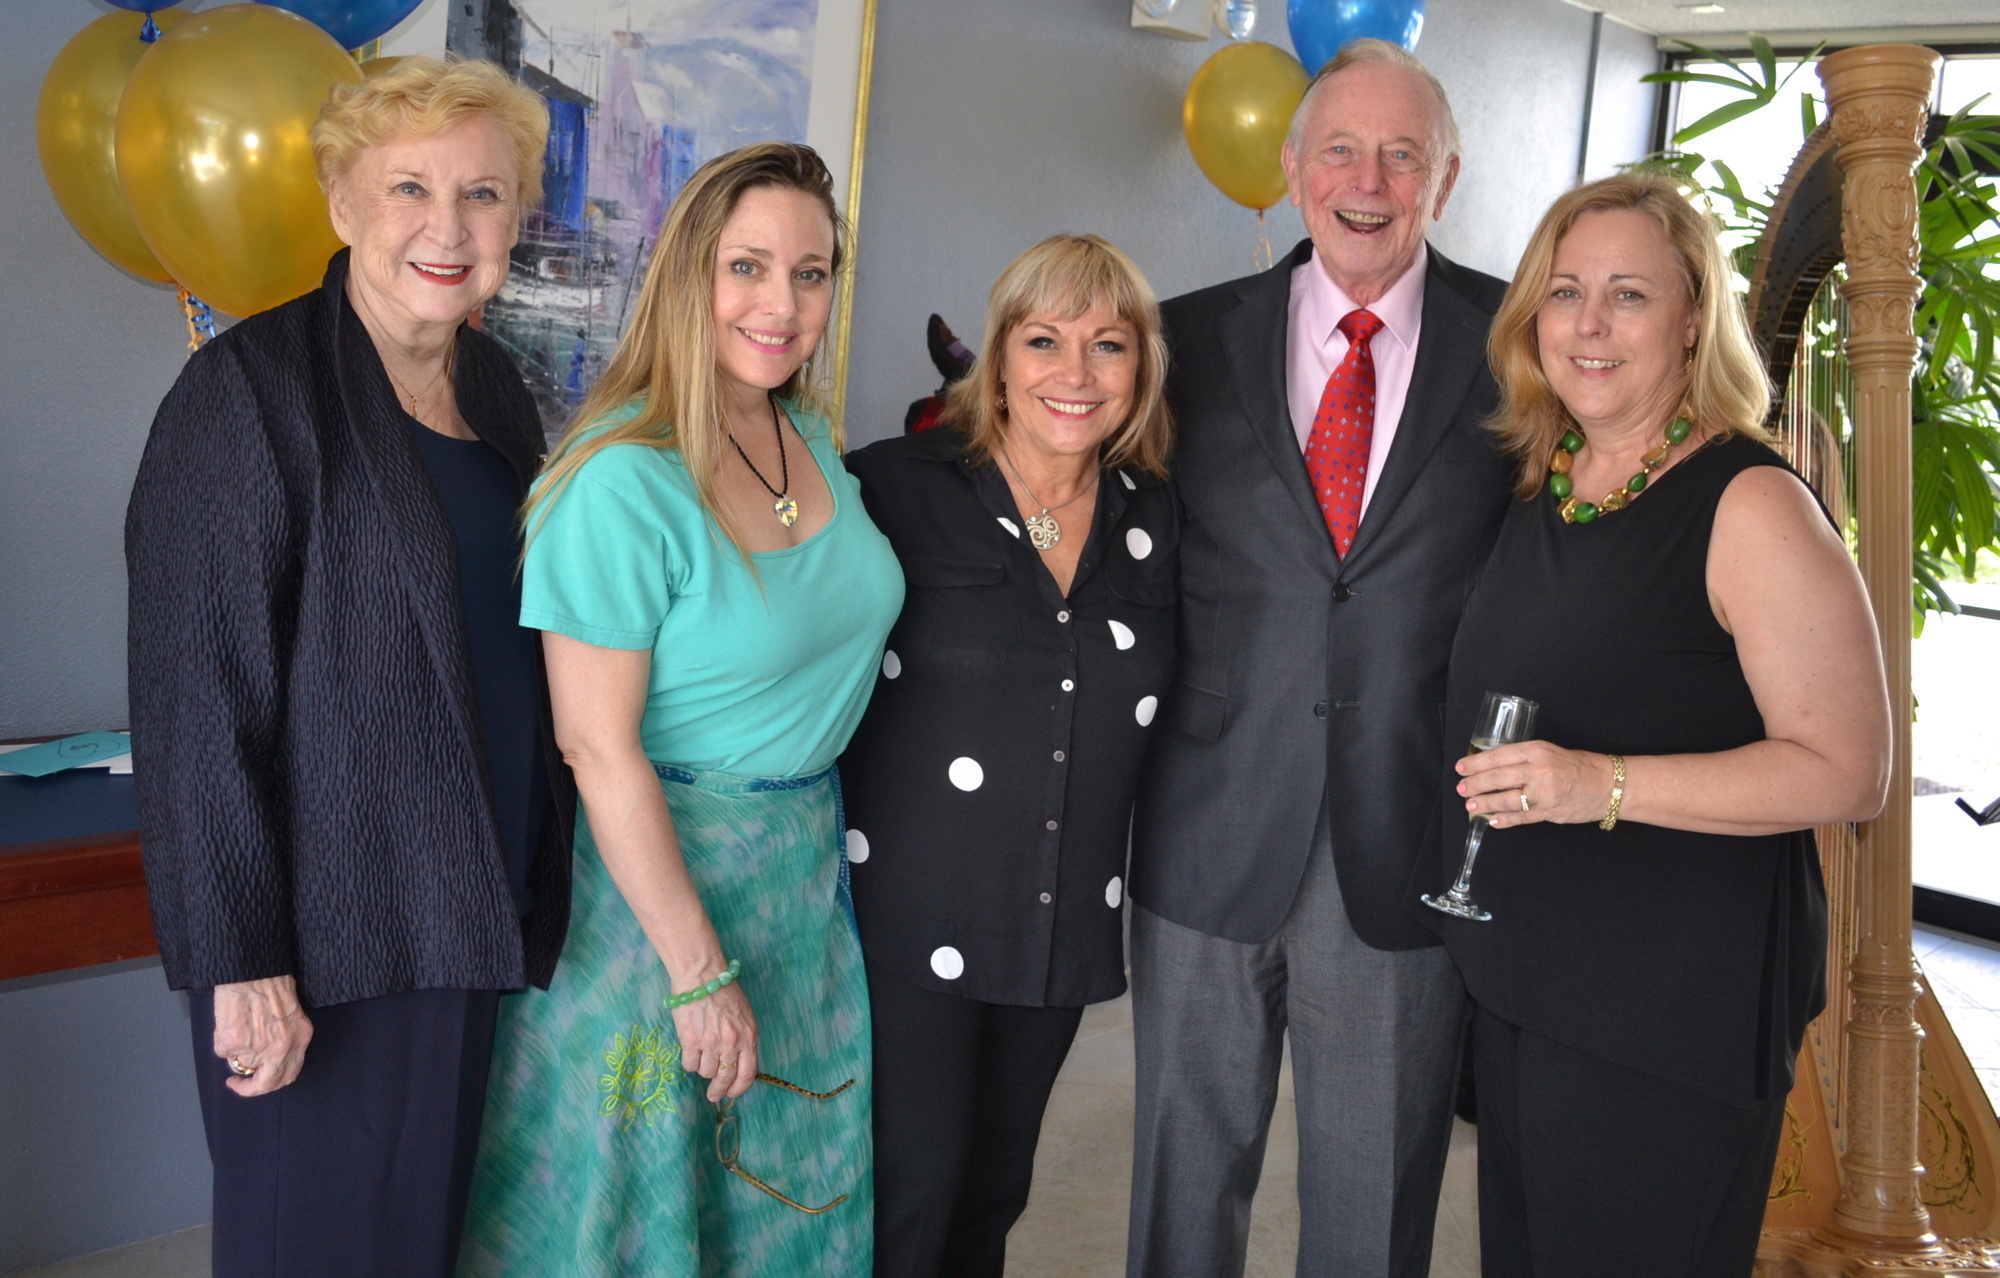 New nonagenarian Fred Mackenzie with his wife Nancy, far left, and three daughters, from left Elizabeth Mackenzie from Philadelphia, Maryellen Mackenzie from Las Vegas and Sarajane Mackenzie from Princeton. Photo by Molly Schechter